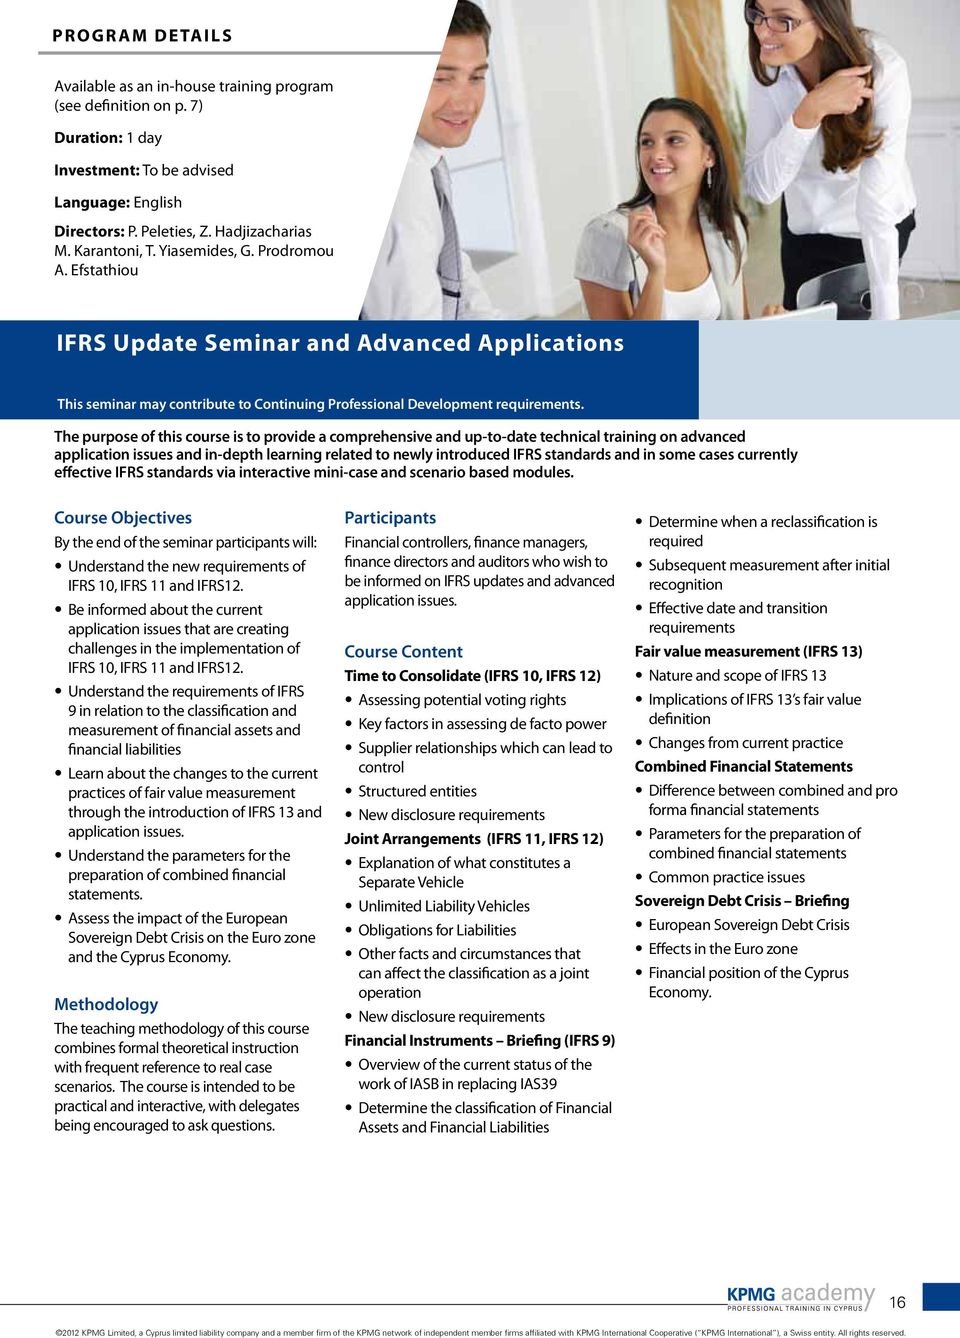 The purpose of this course is to provide a comprehensive and up-to-date technical training on advanced application issues and in-depth learning related to newly introduced IFRS standards and in some